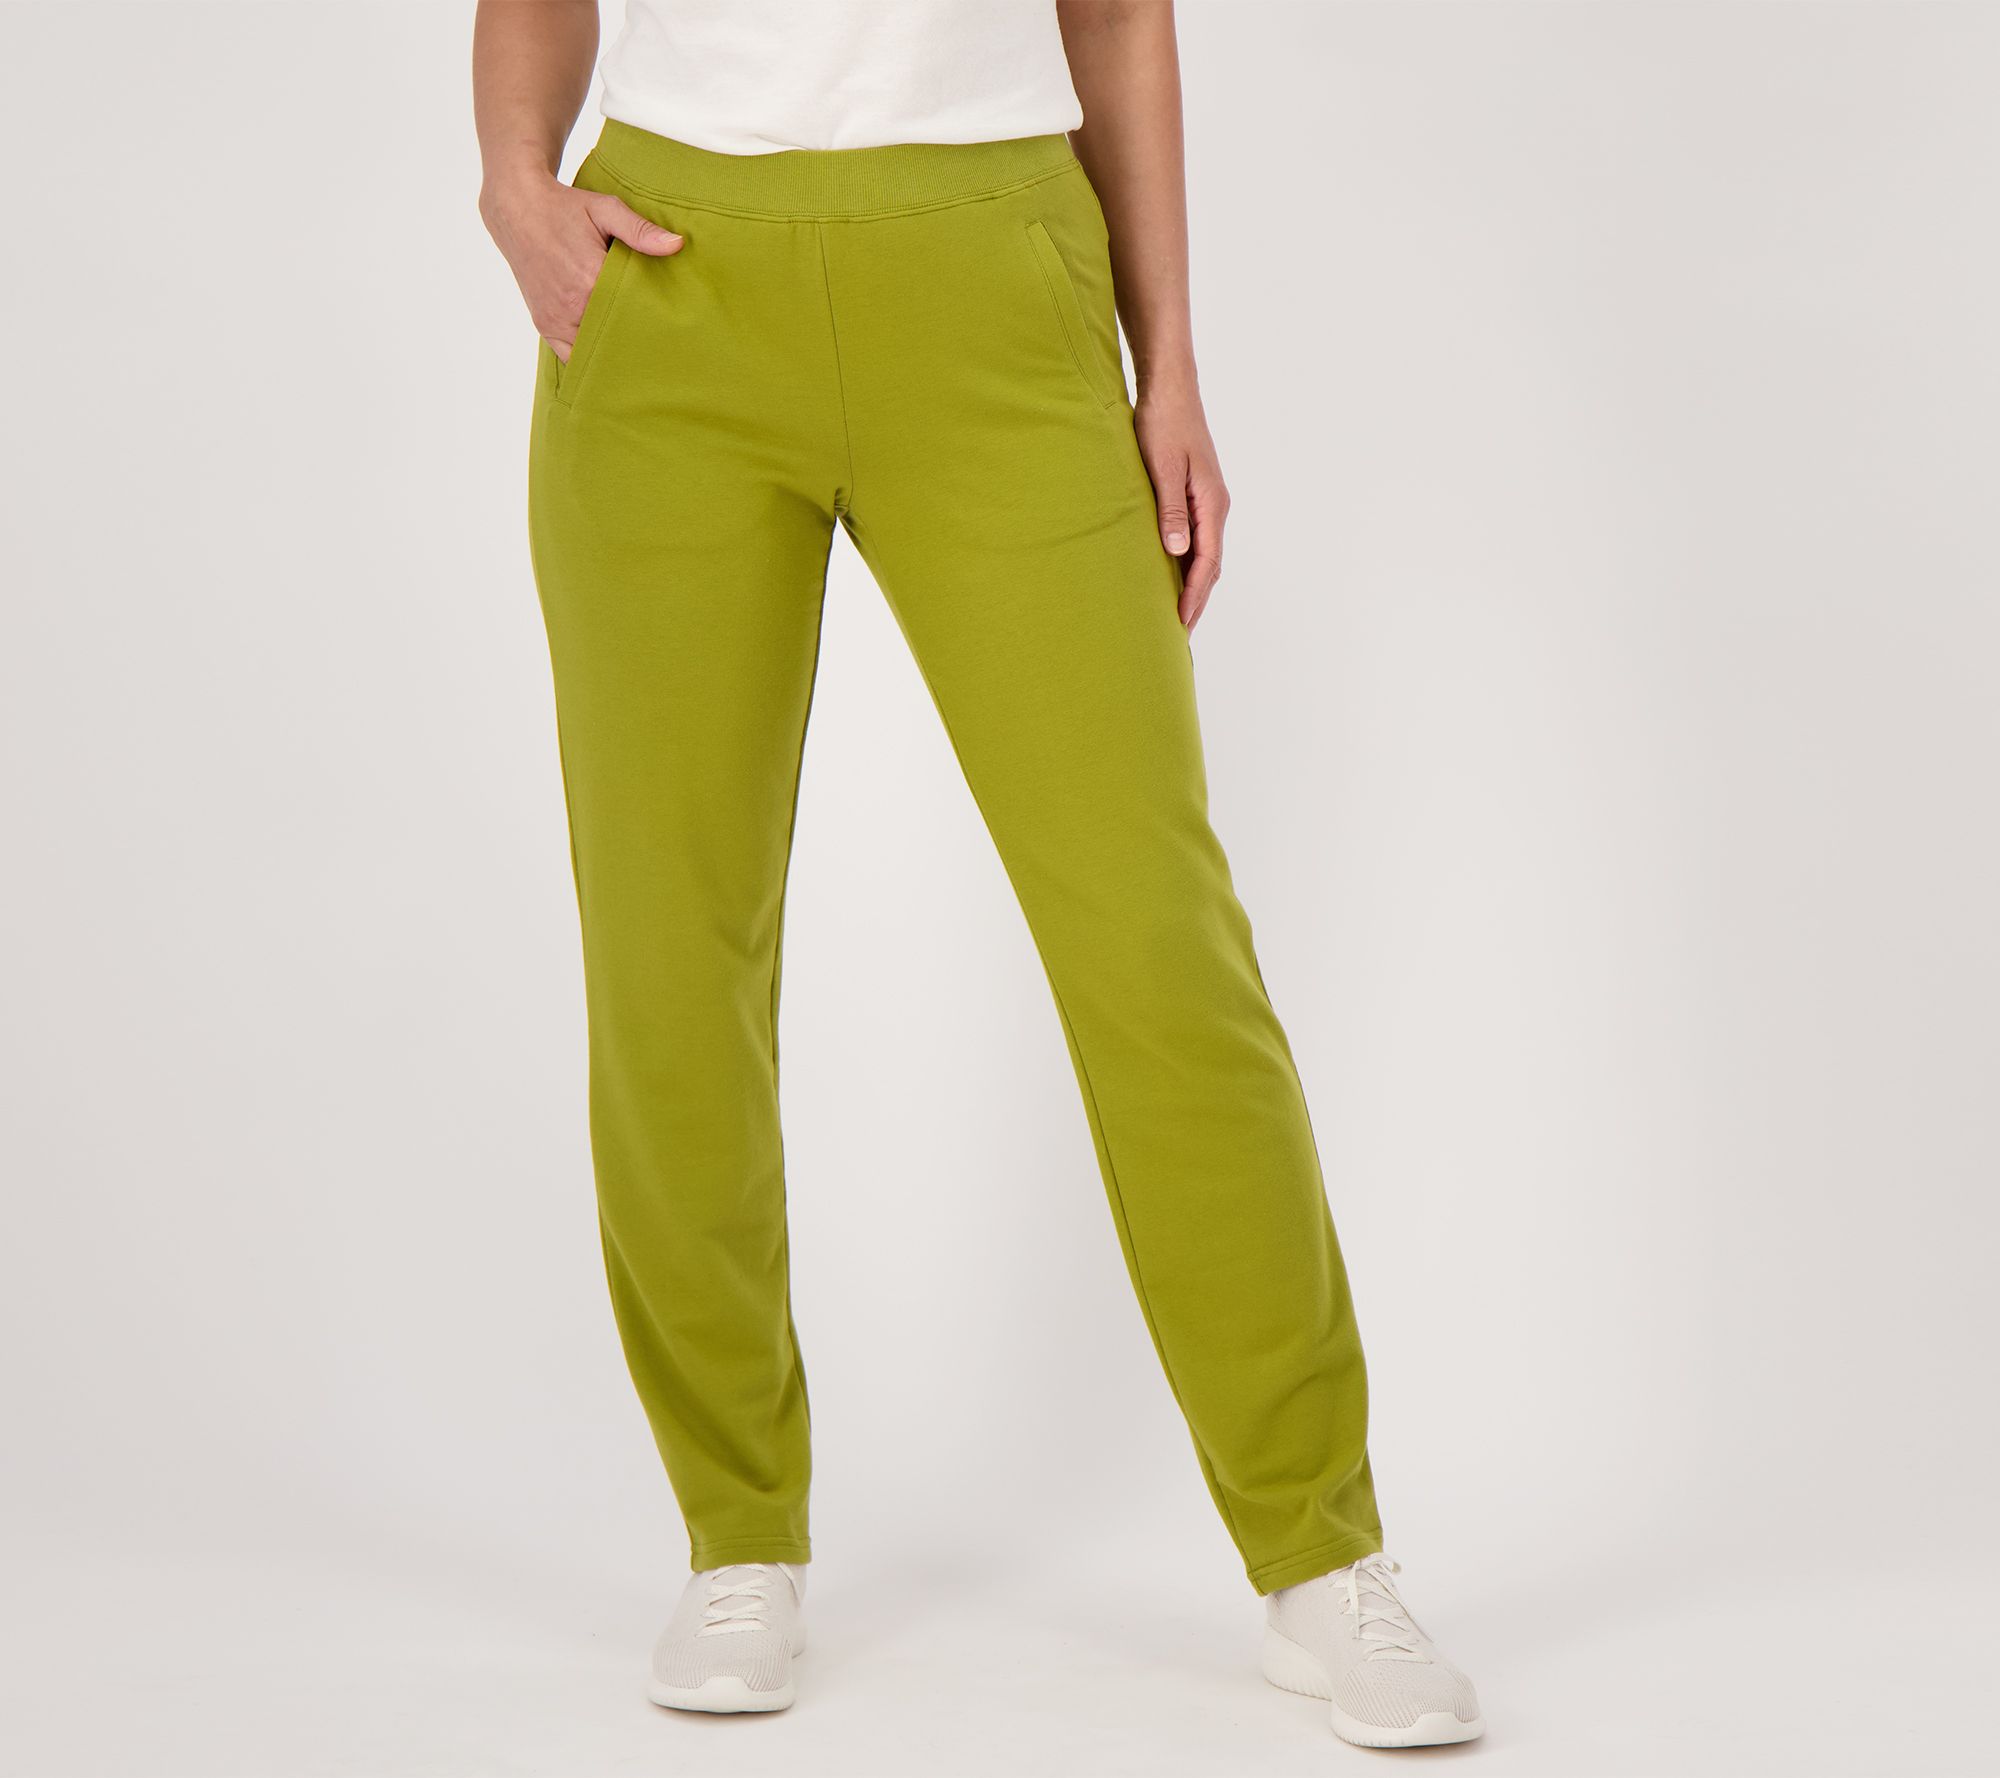 Adapted State Joggers for Shorter Ladies?? : r/lululemon